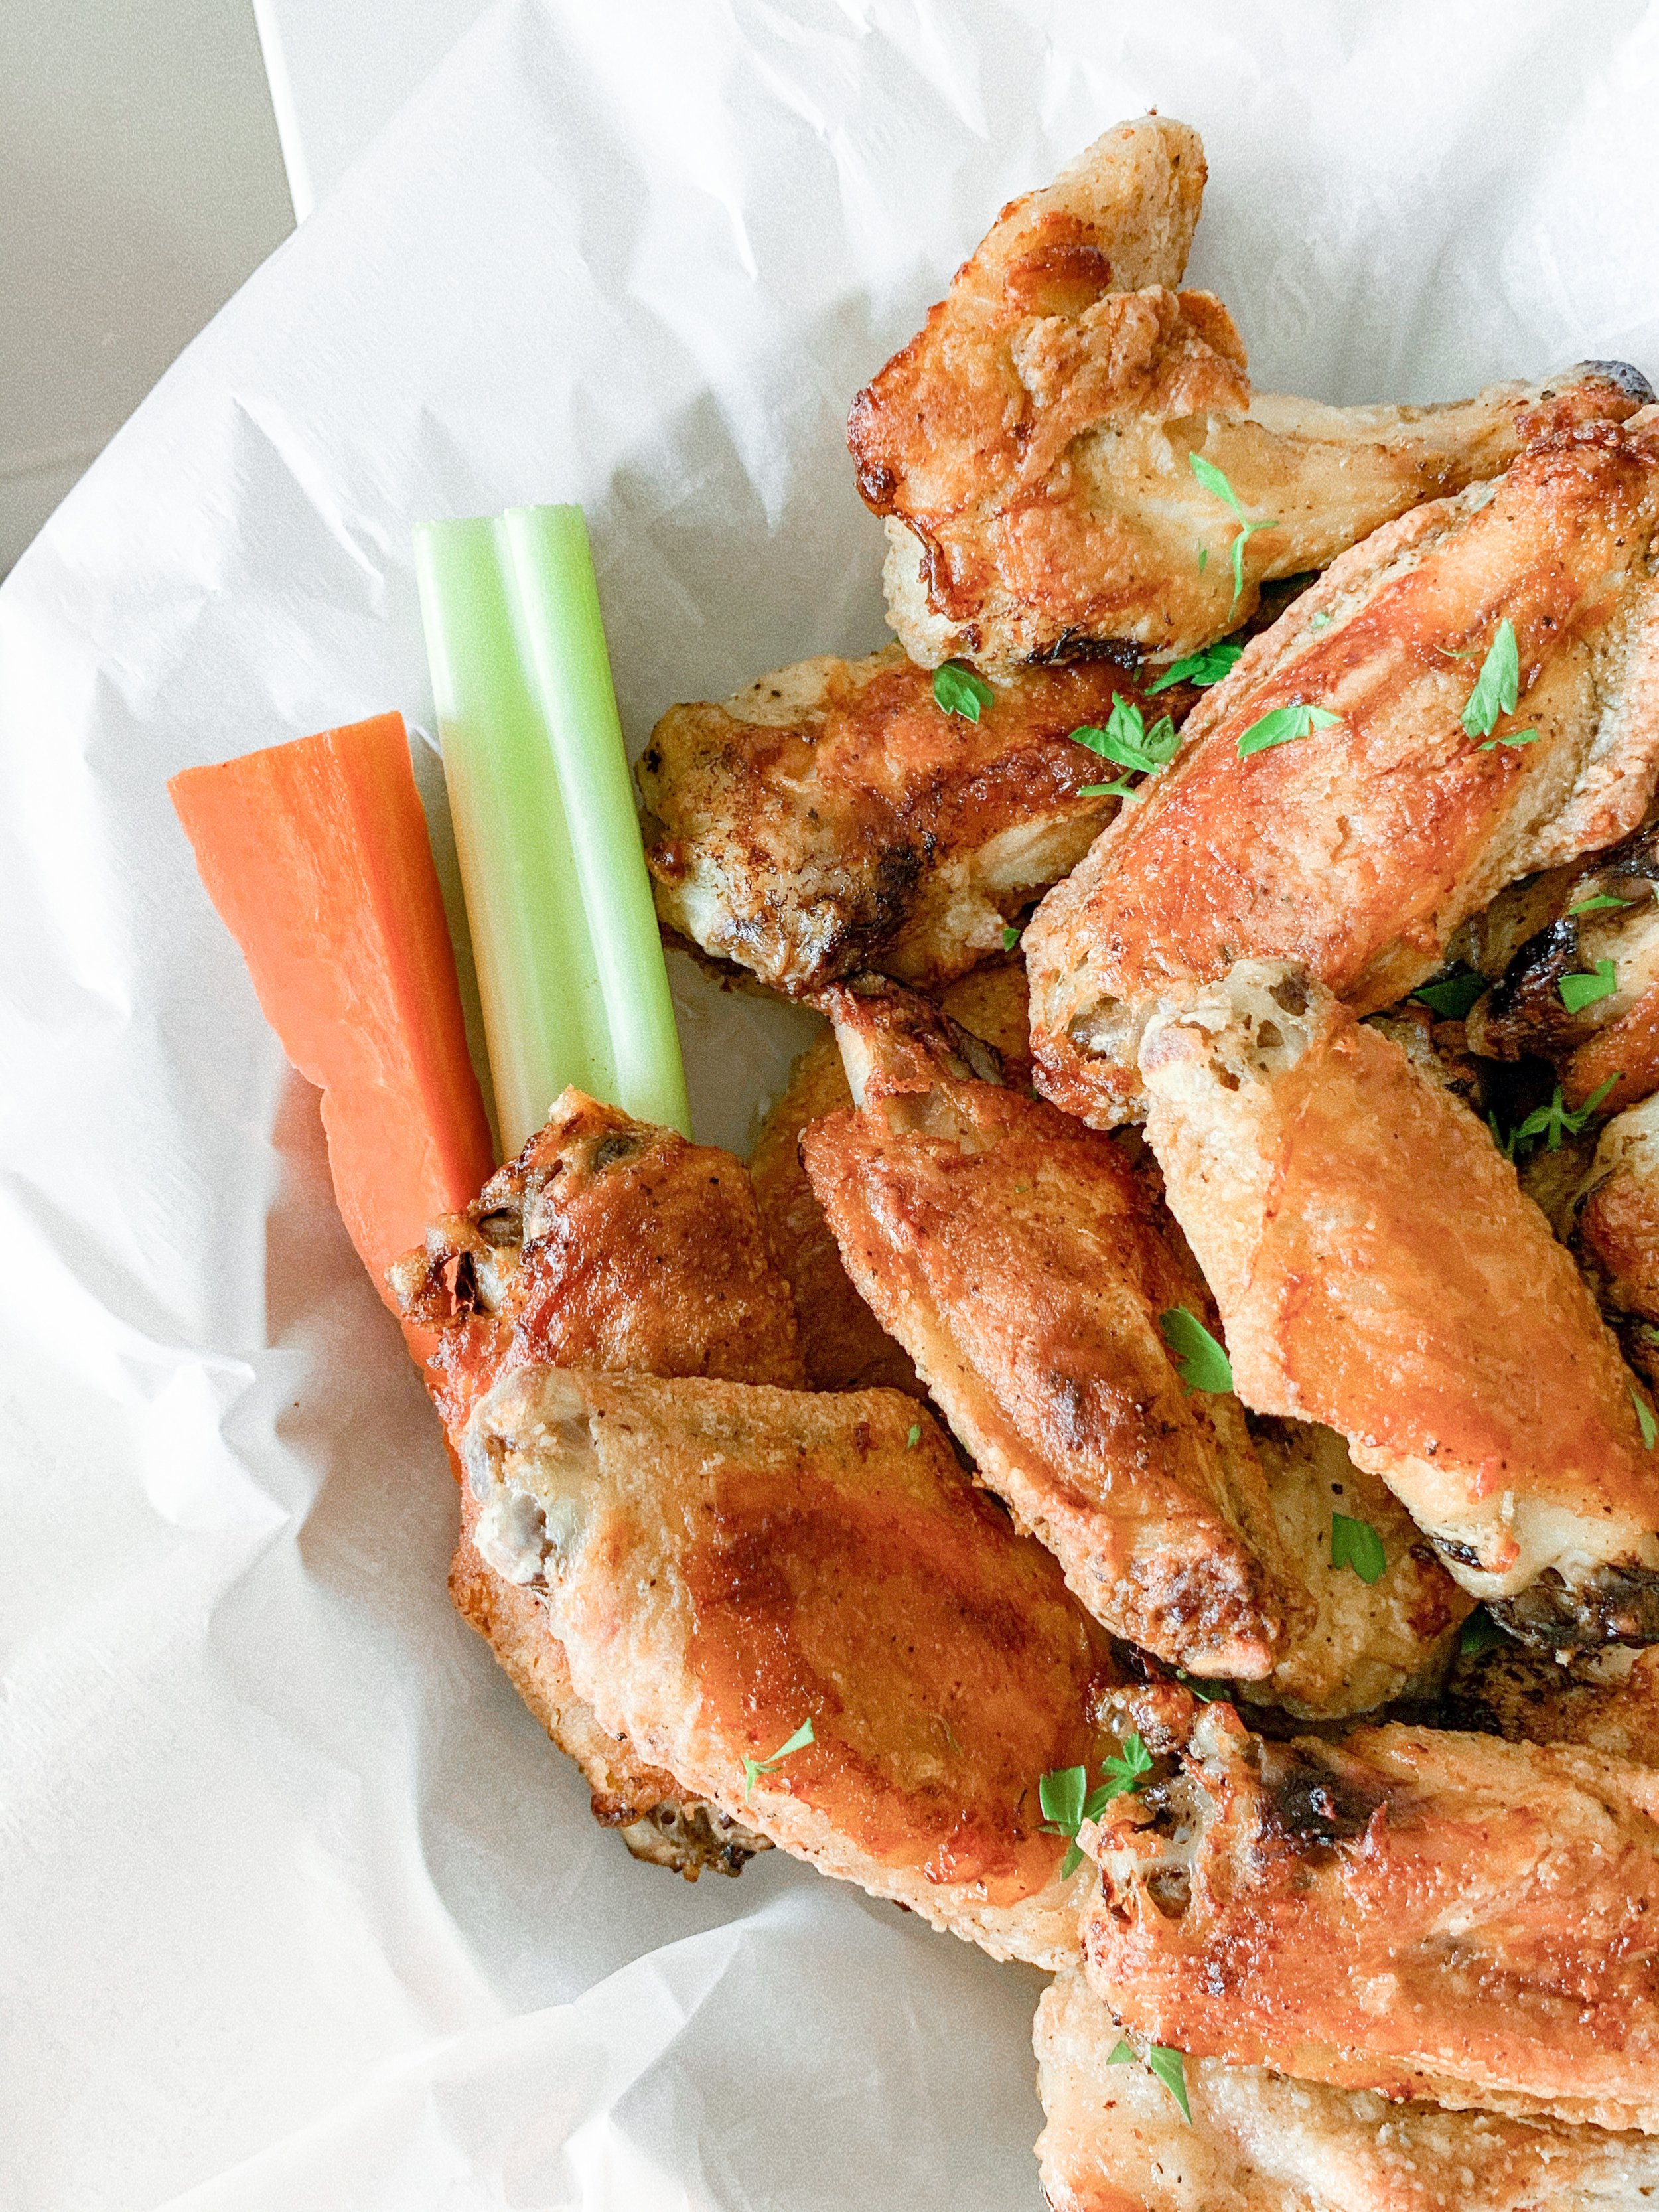 Crispy Oven-Baked Chicken Wings with carrots and celery